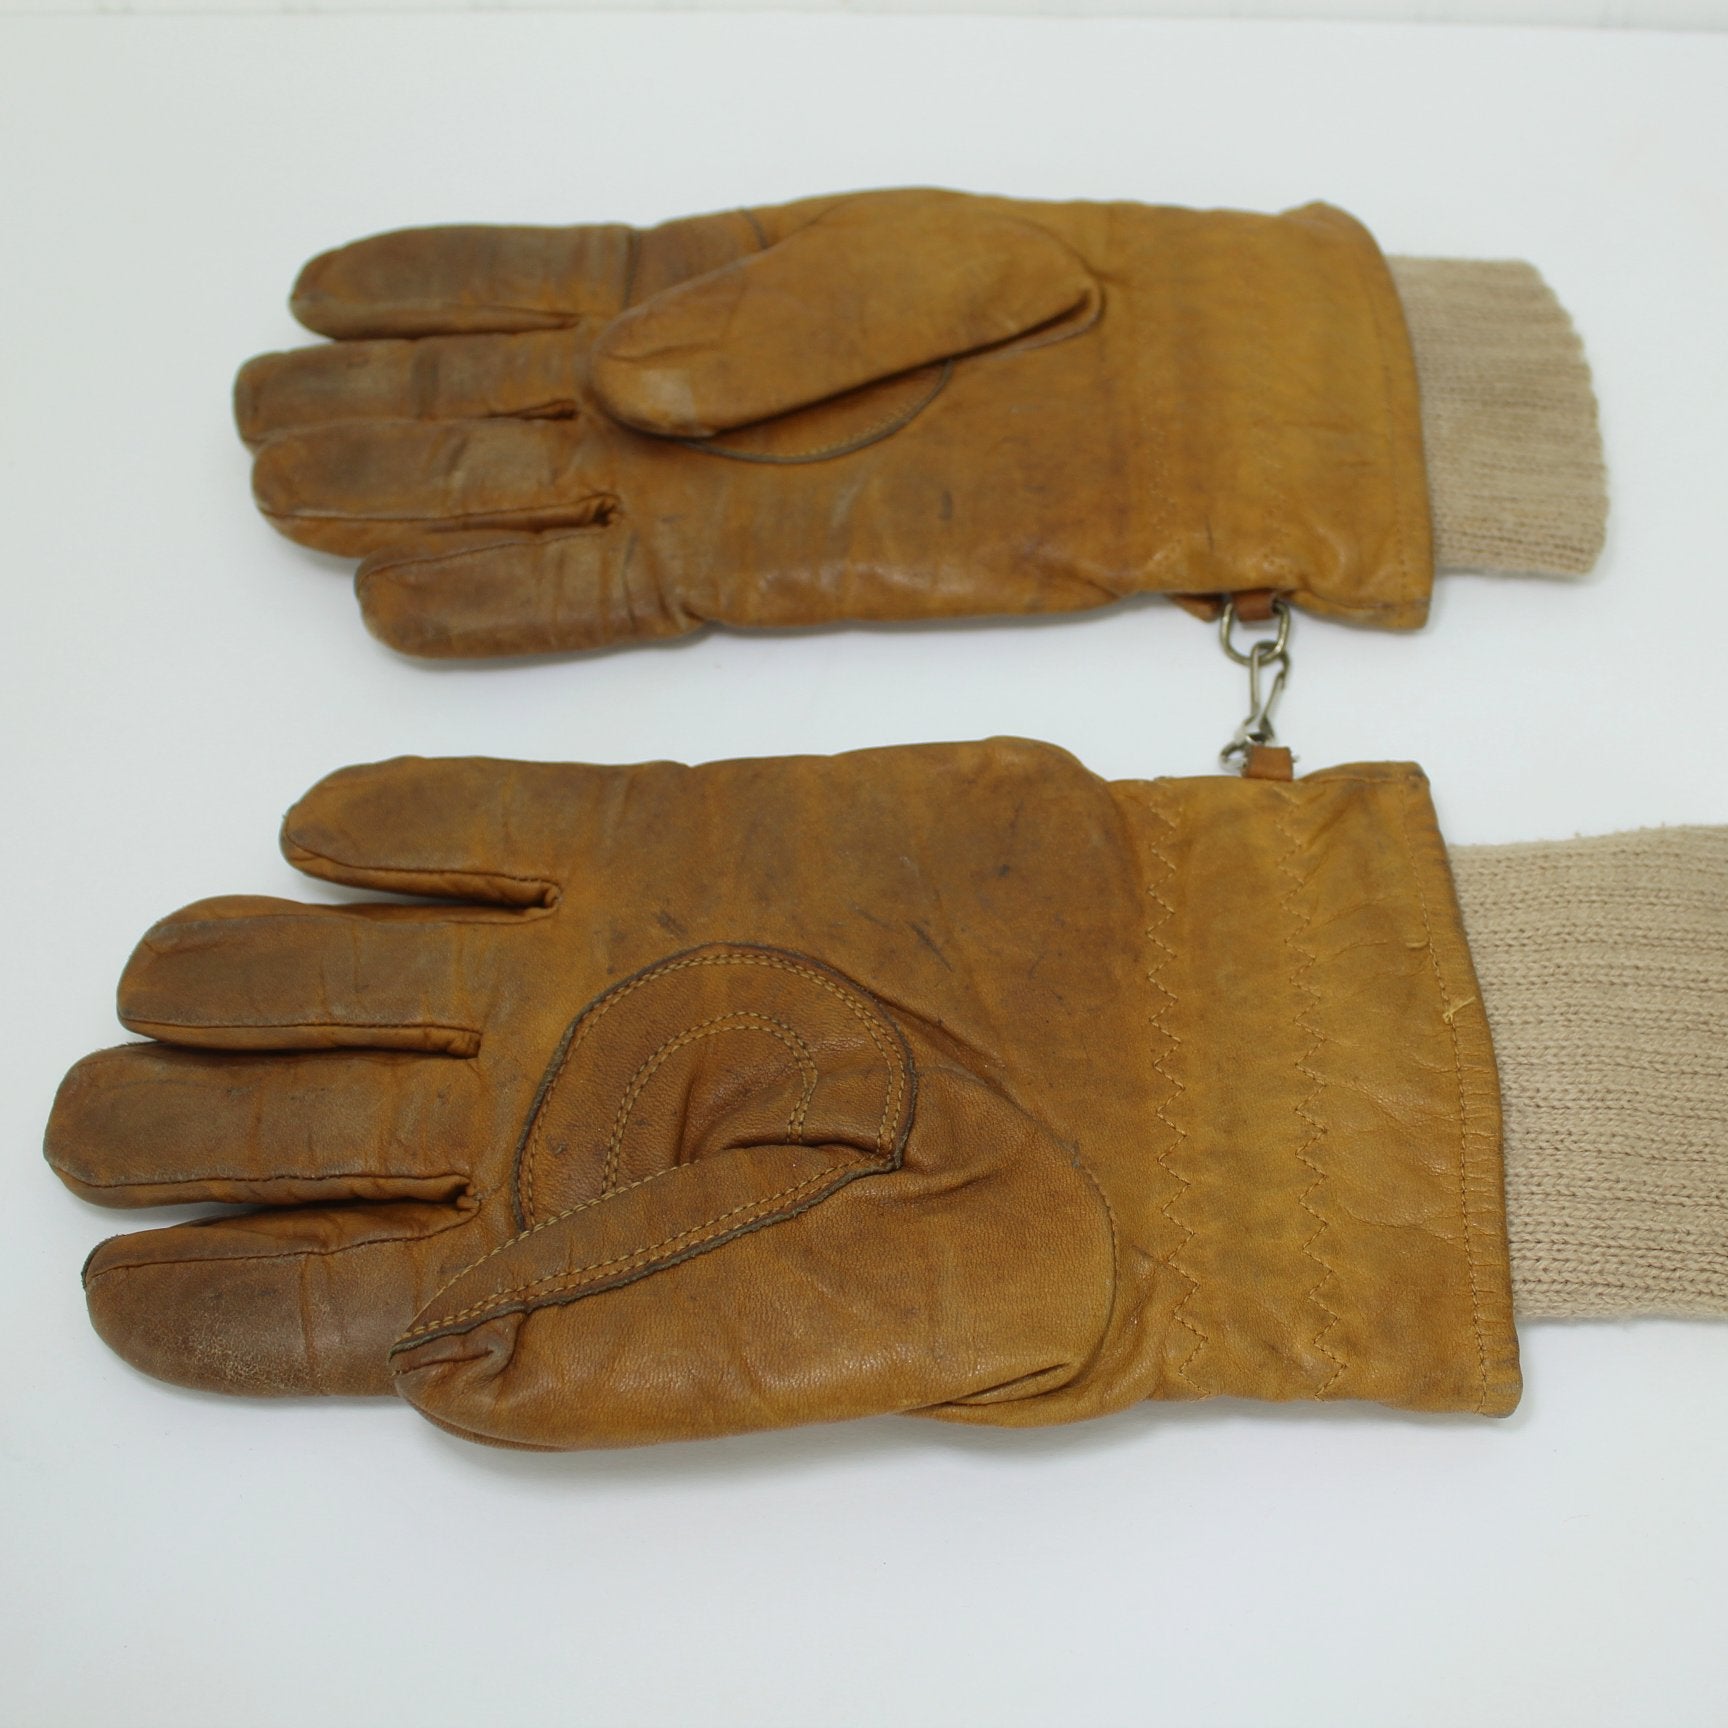 Conroy Leather Gloves XC Acrylic Inner Gloves Mens Large Pre Owned both gloves reverse